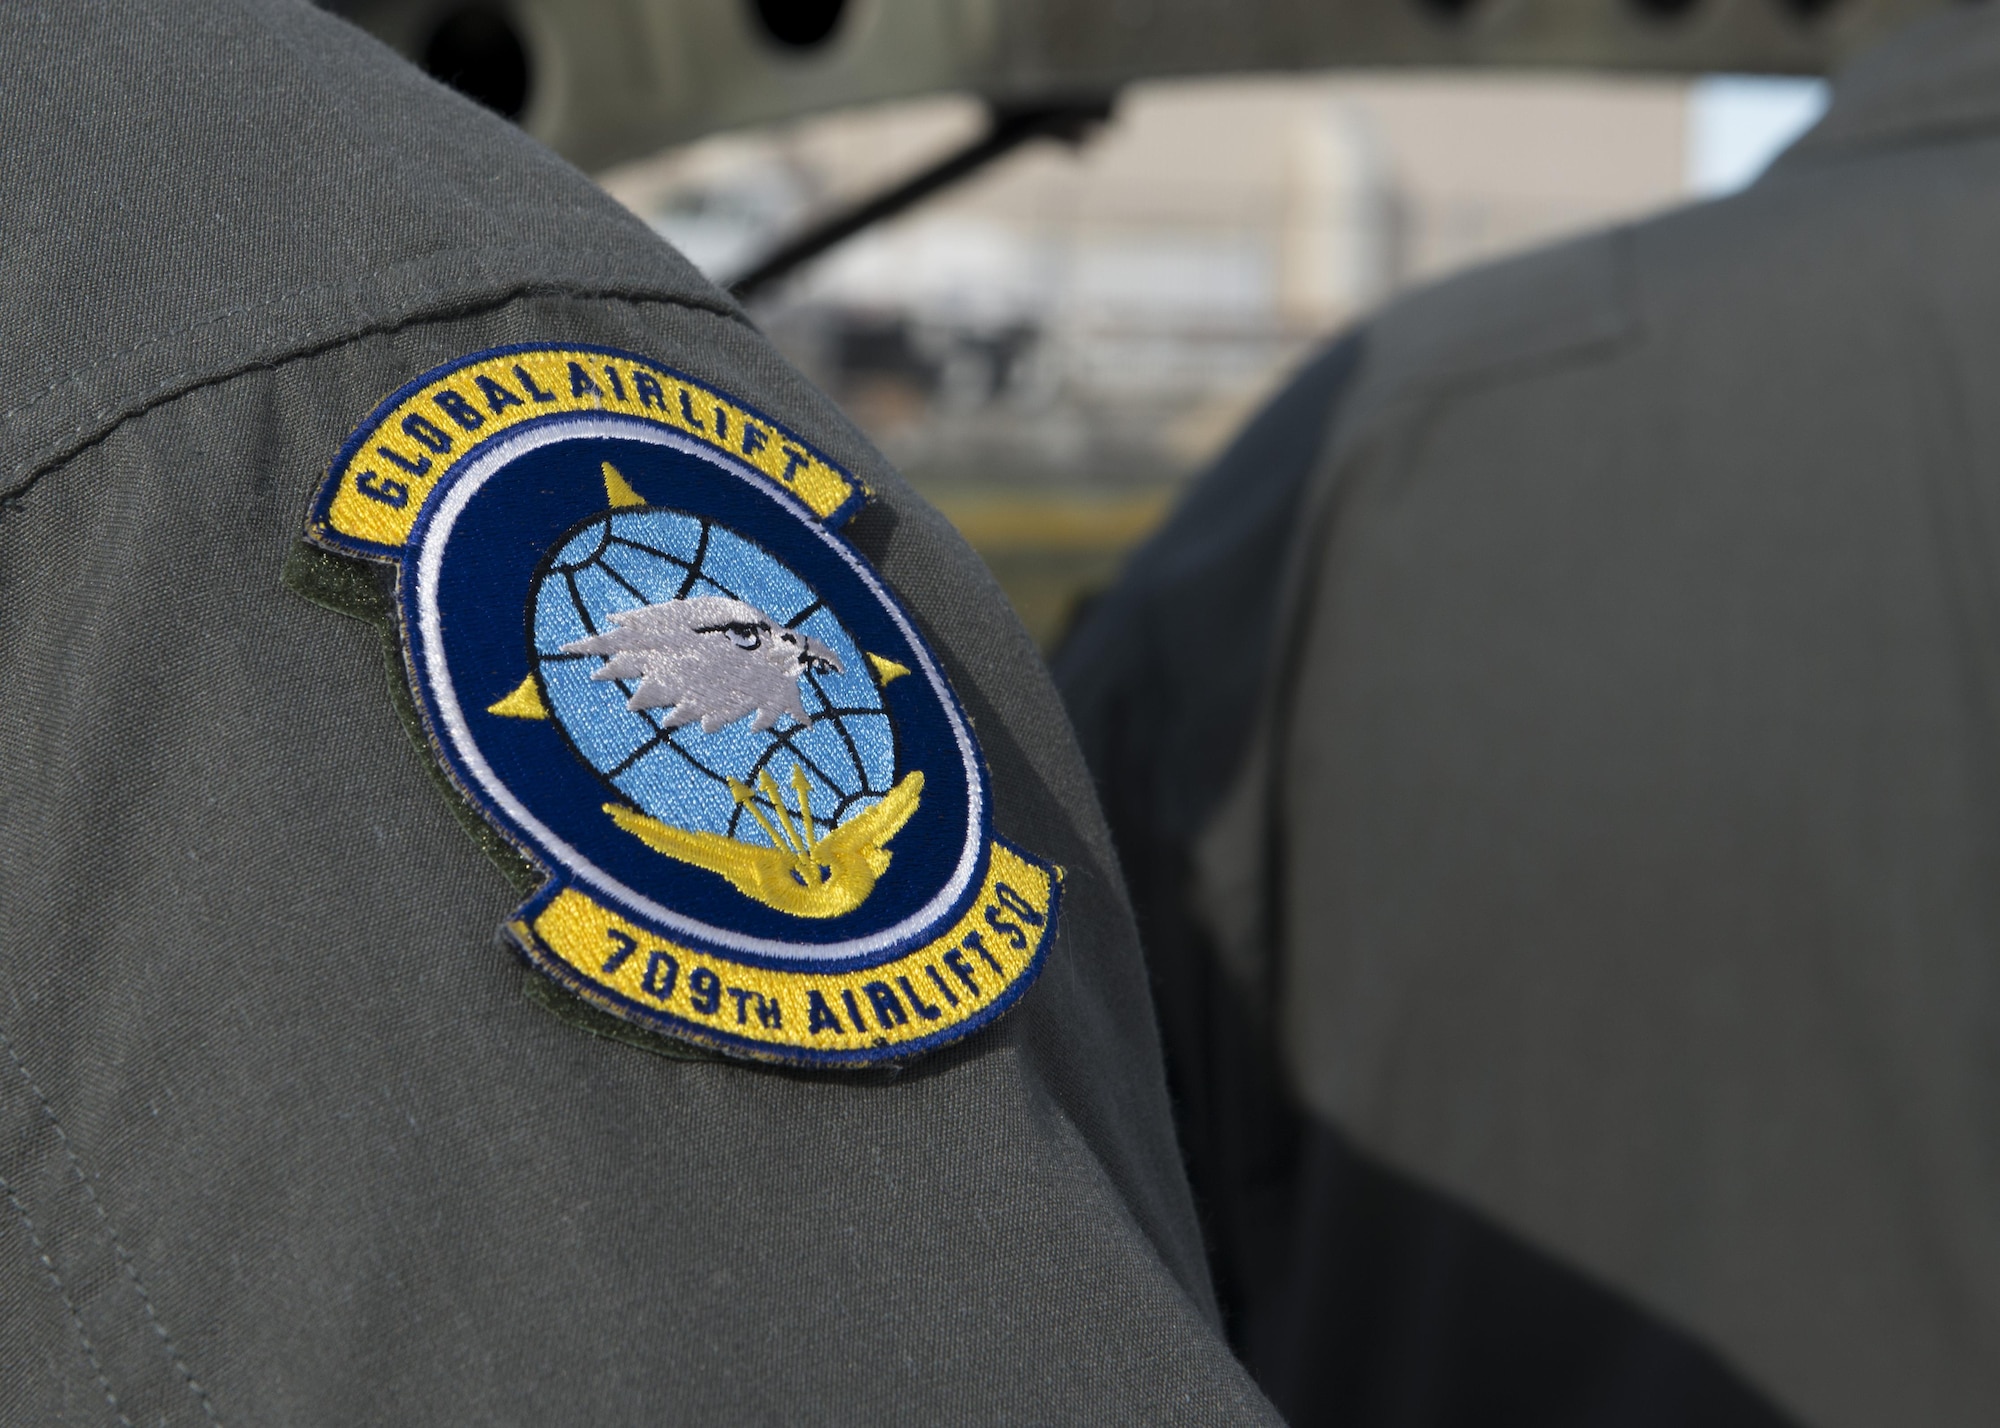 A 709th Airlift Squadron patch sits on the shoulder of Master Sgt. Paul Adkins, 709th AS loadmaster, during a mission to bring the Fairchild C-119B Flying Boxcar #48-0352 “Am Can Co Special” to the Air Mobility Command Museum via a C-5M Super Galaxy airlifter Dec. 16, 2016, at Edwards Air Force Base, Calif. The 709th AS is a component of the 512th Airlift Wing, a Reserve unit stationed at Dover AFB, Del. (U.S. Air Force photo by Senior Airman Zachary Cacicia)